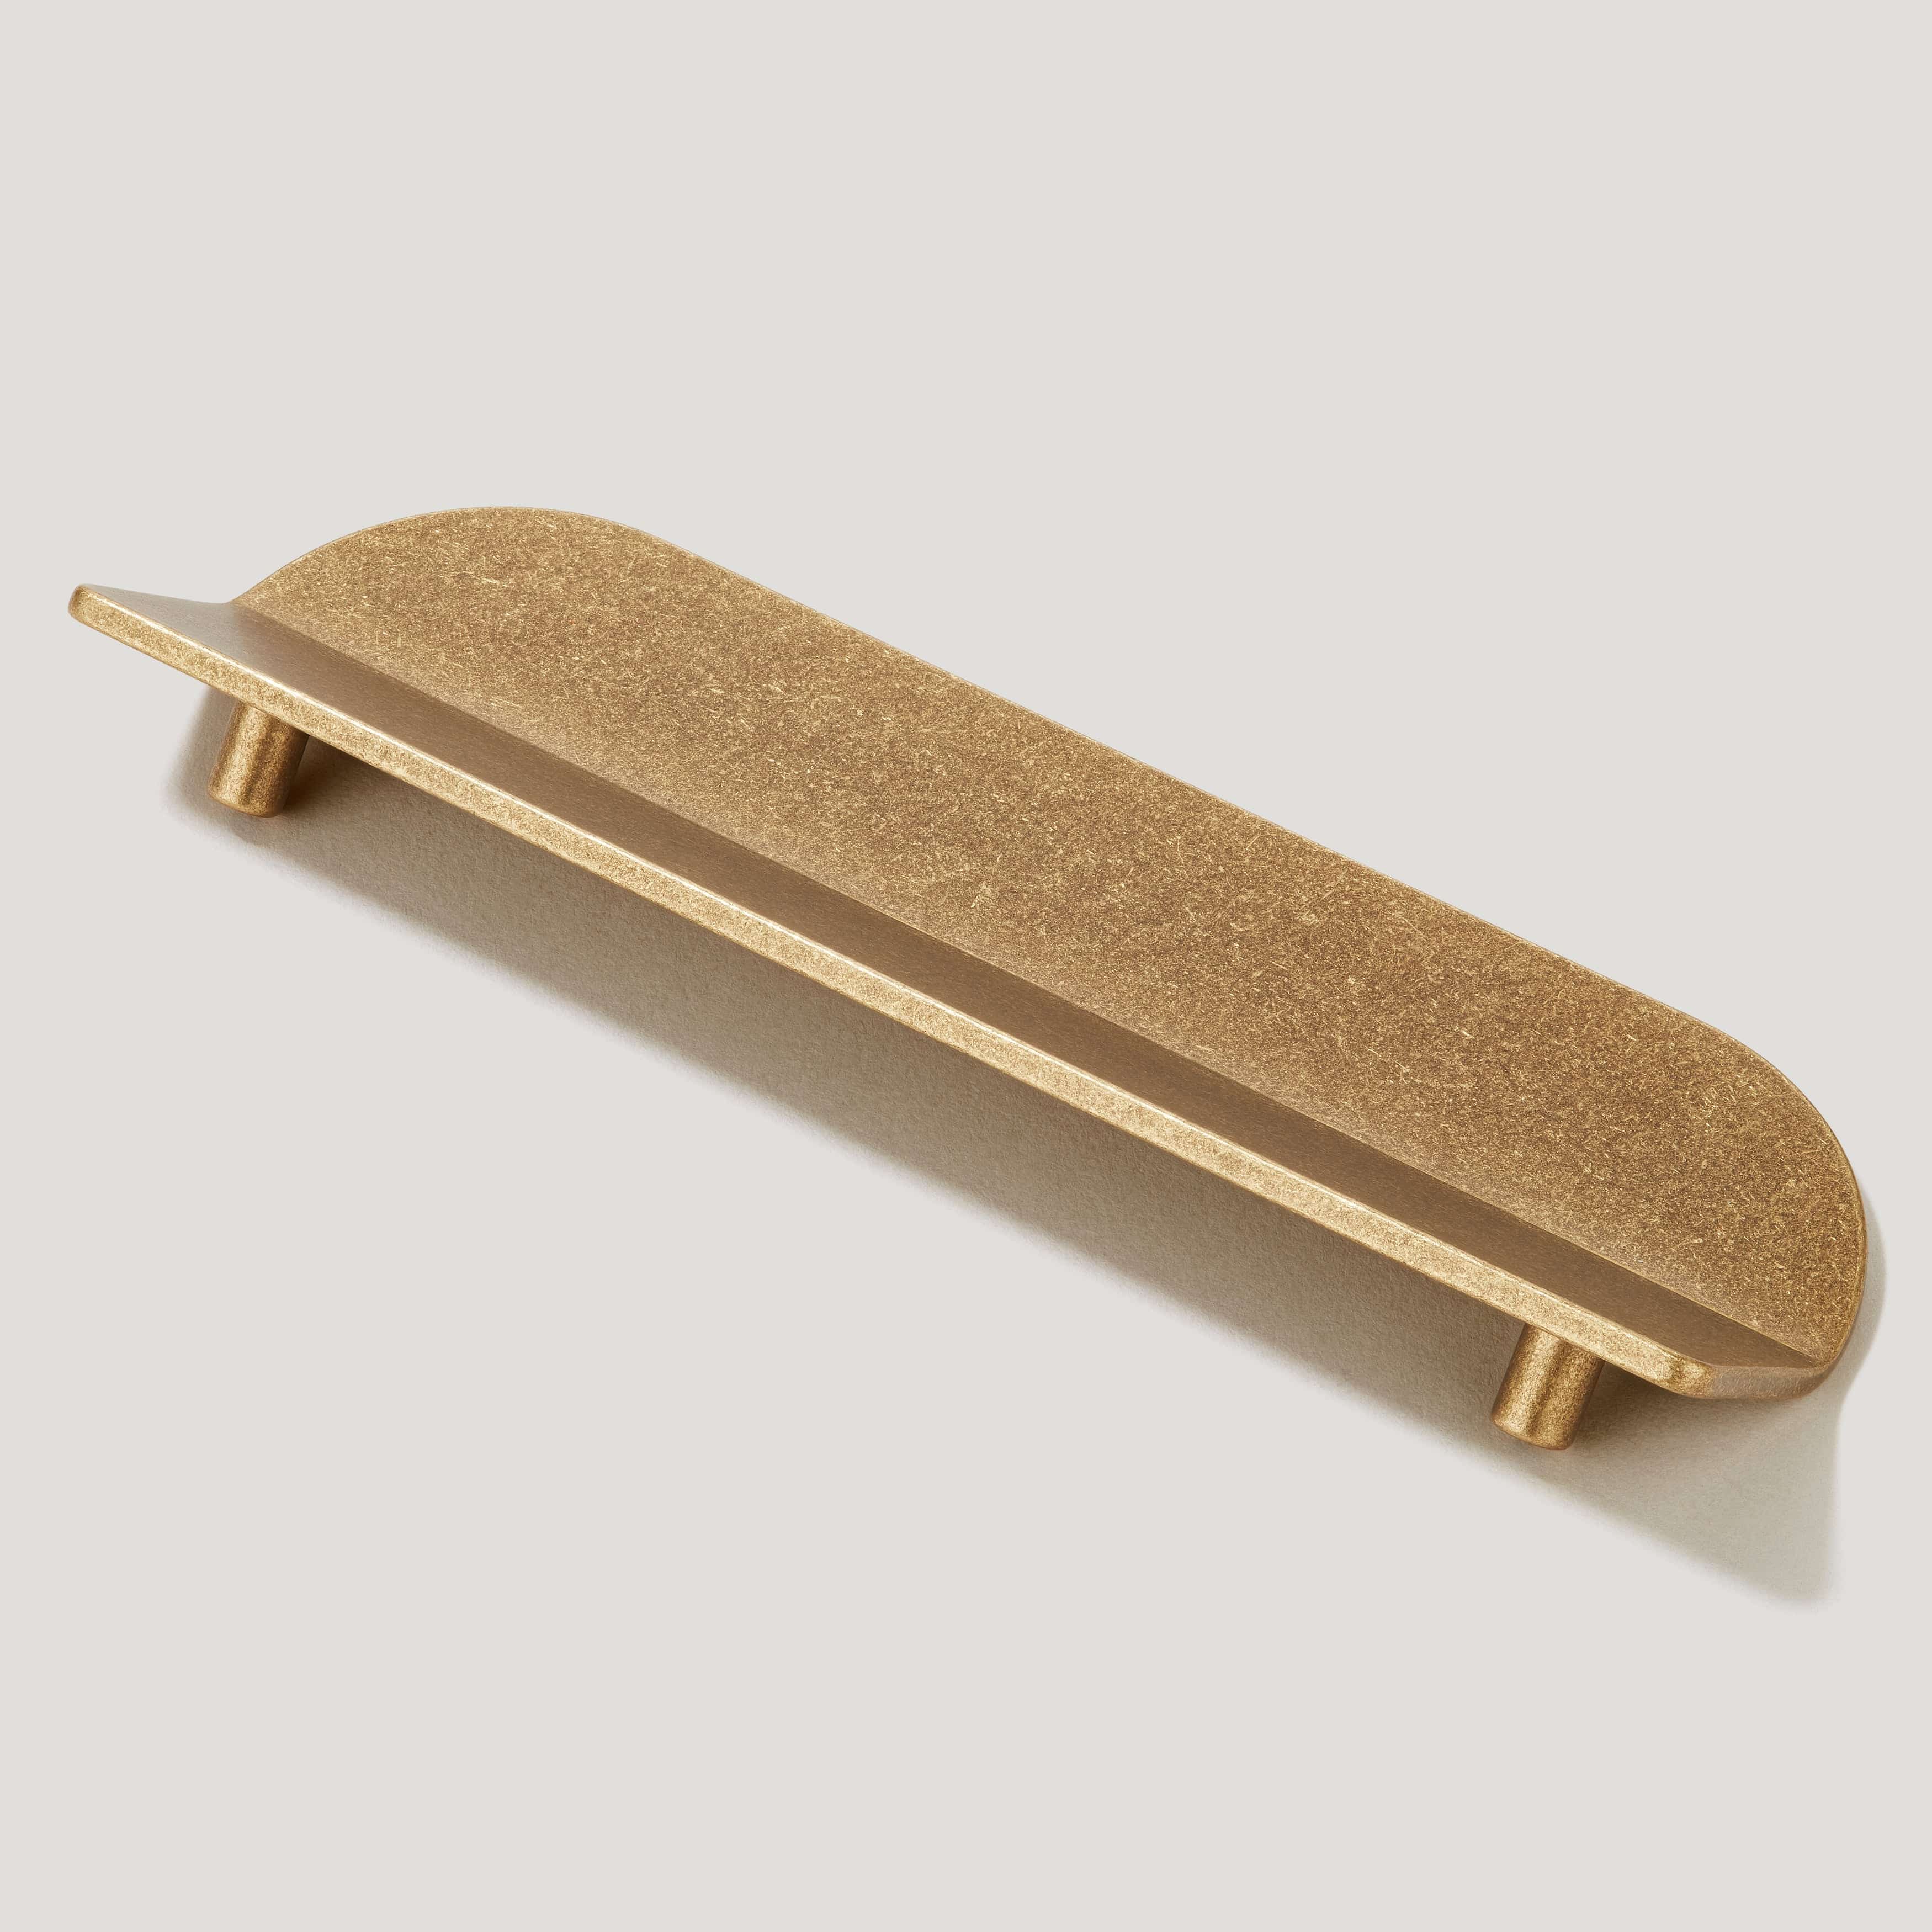 Plank Hardware Cabinetry 160mm (128mm CC) FOLD Long D Shape Front Mounted Handle - Aged Brass